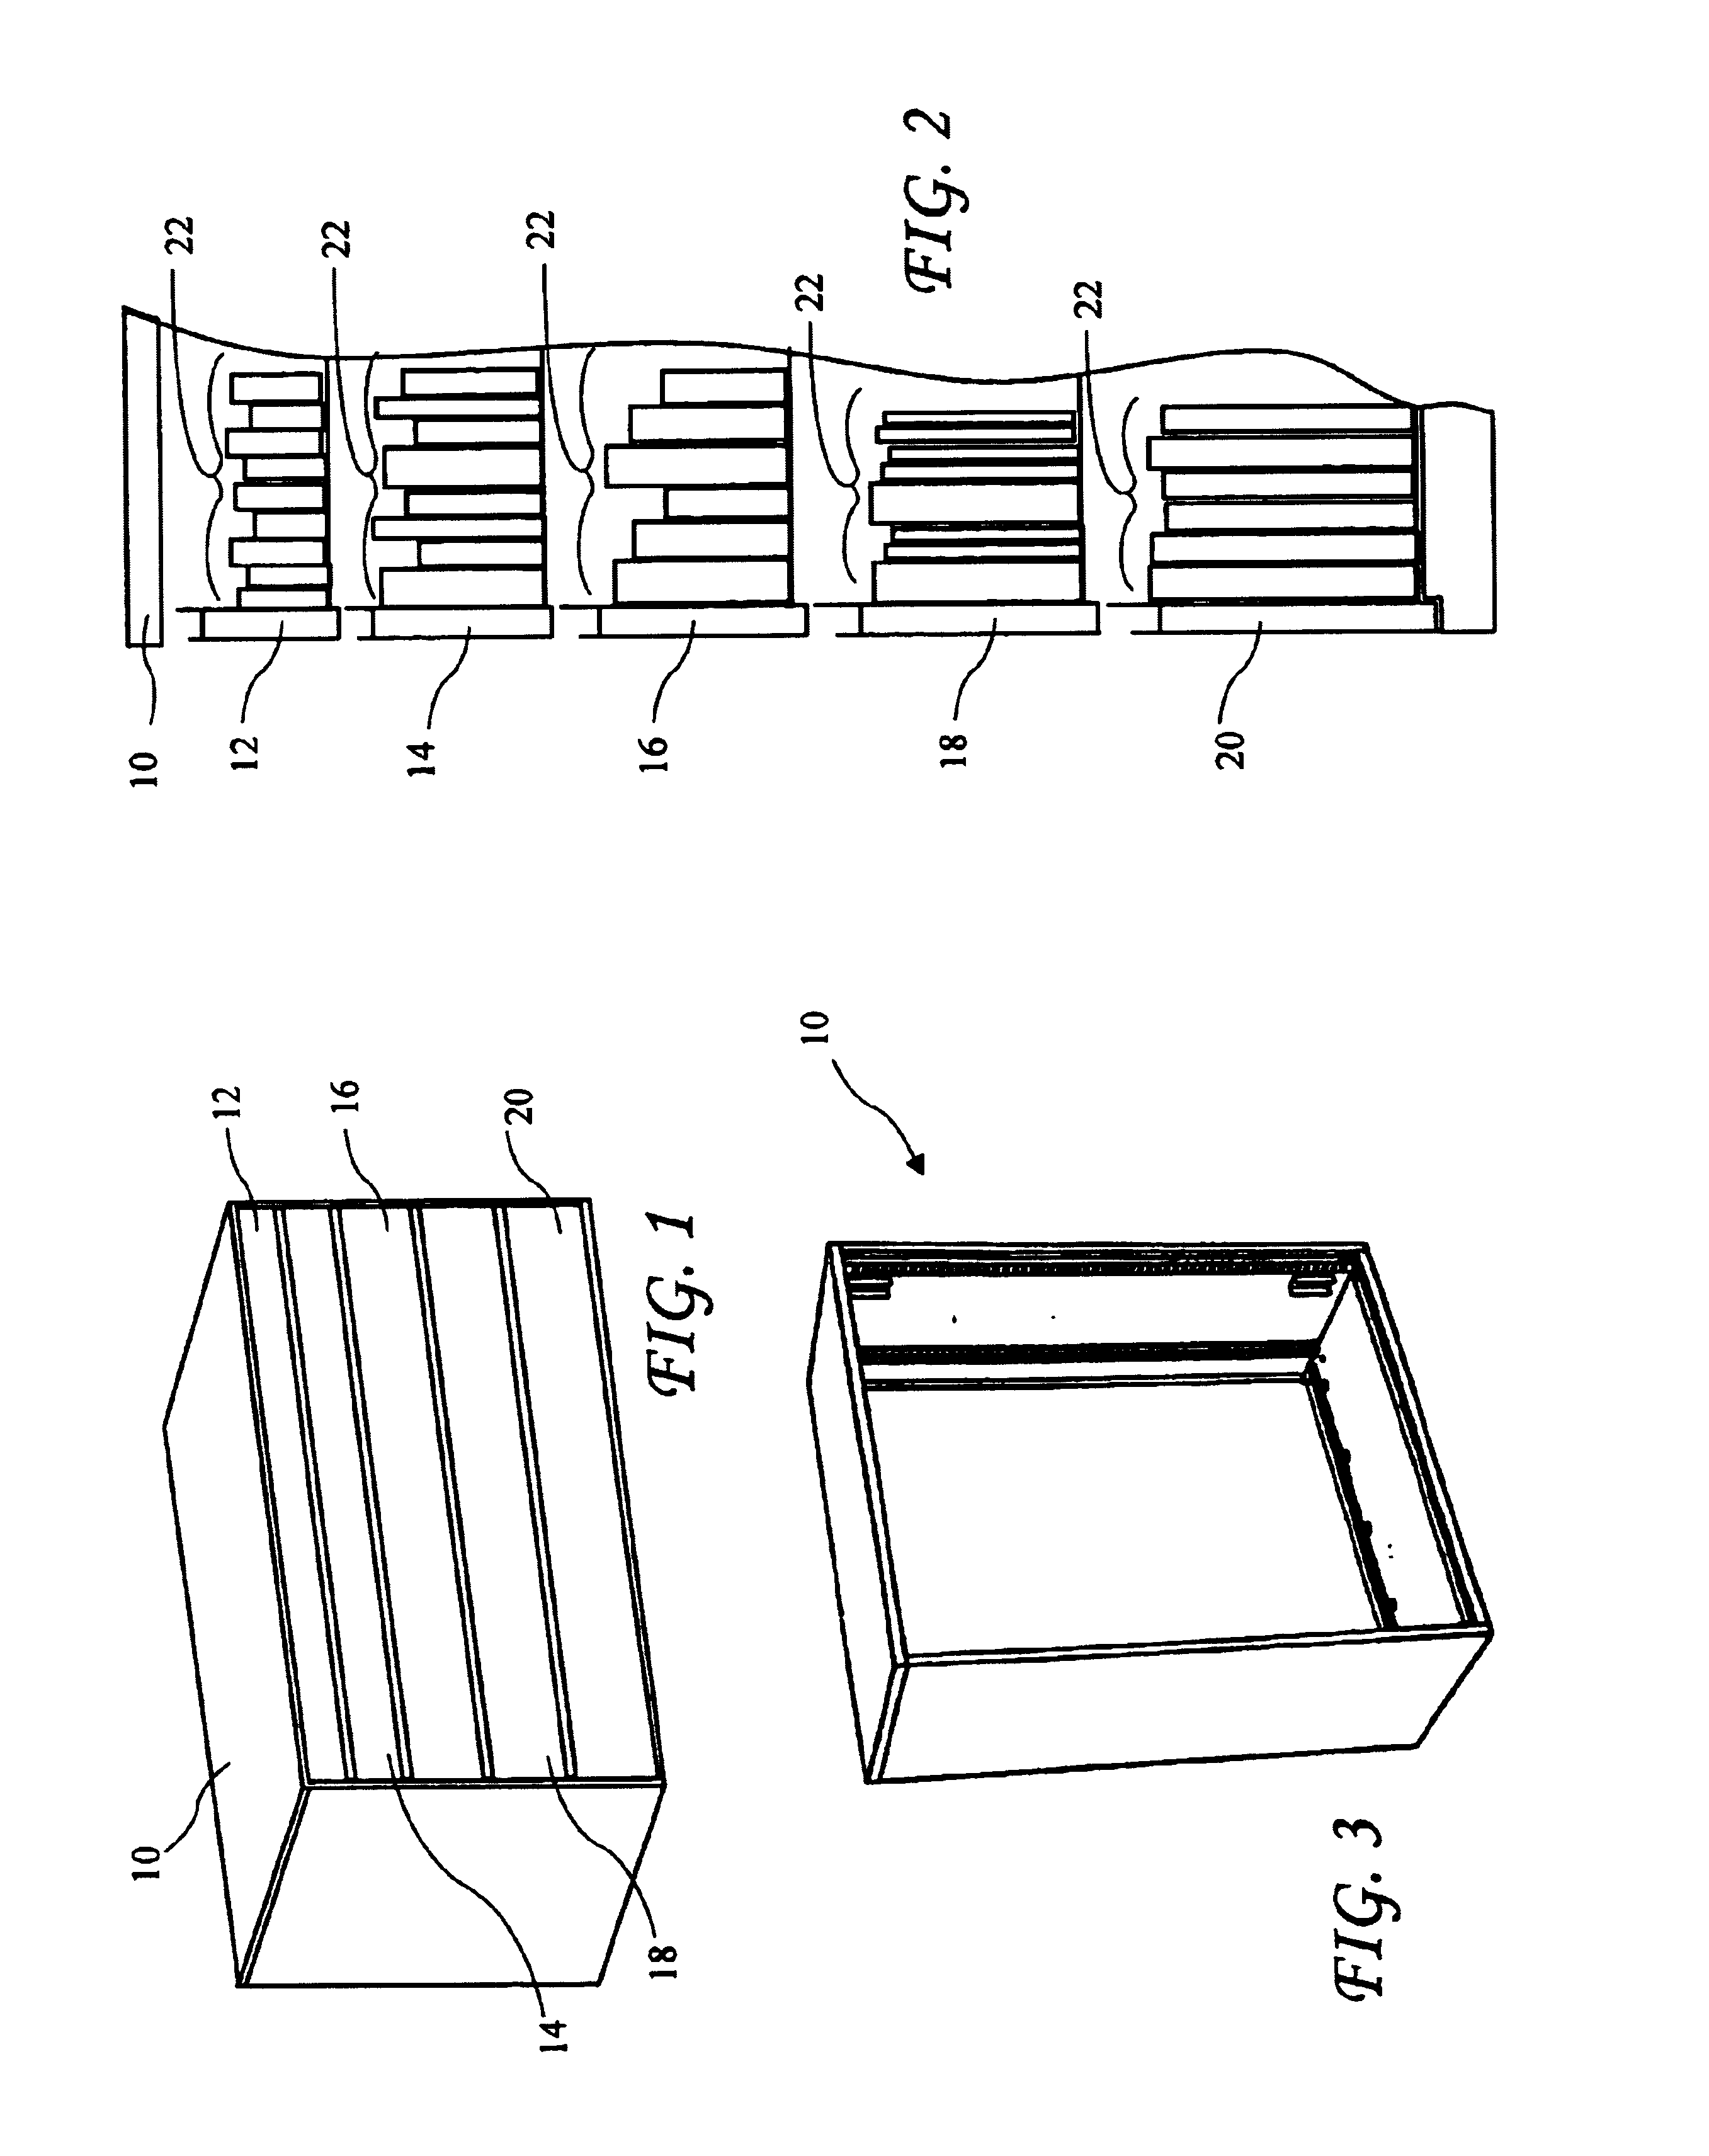 Infinitely adjustable module row divider for a cabinet drawer